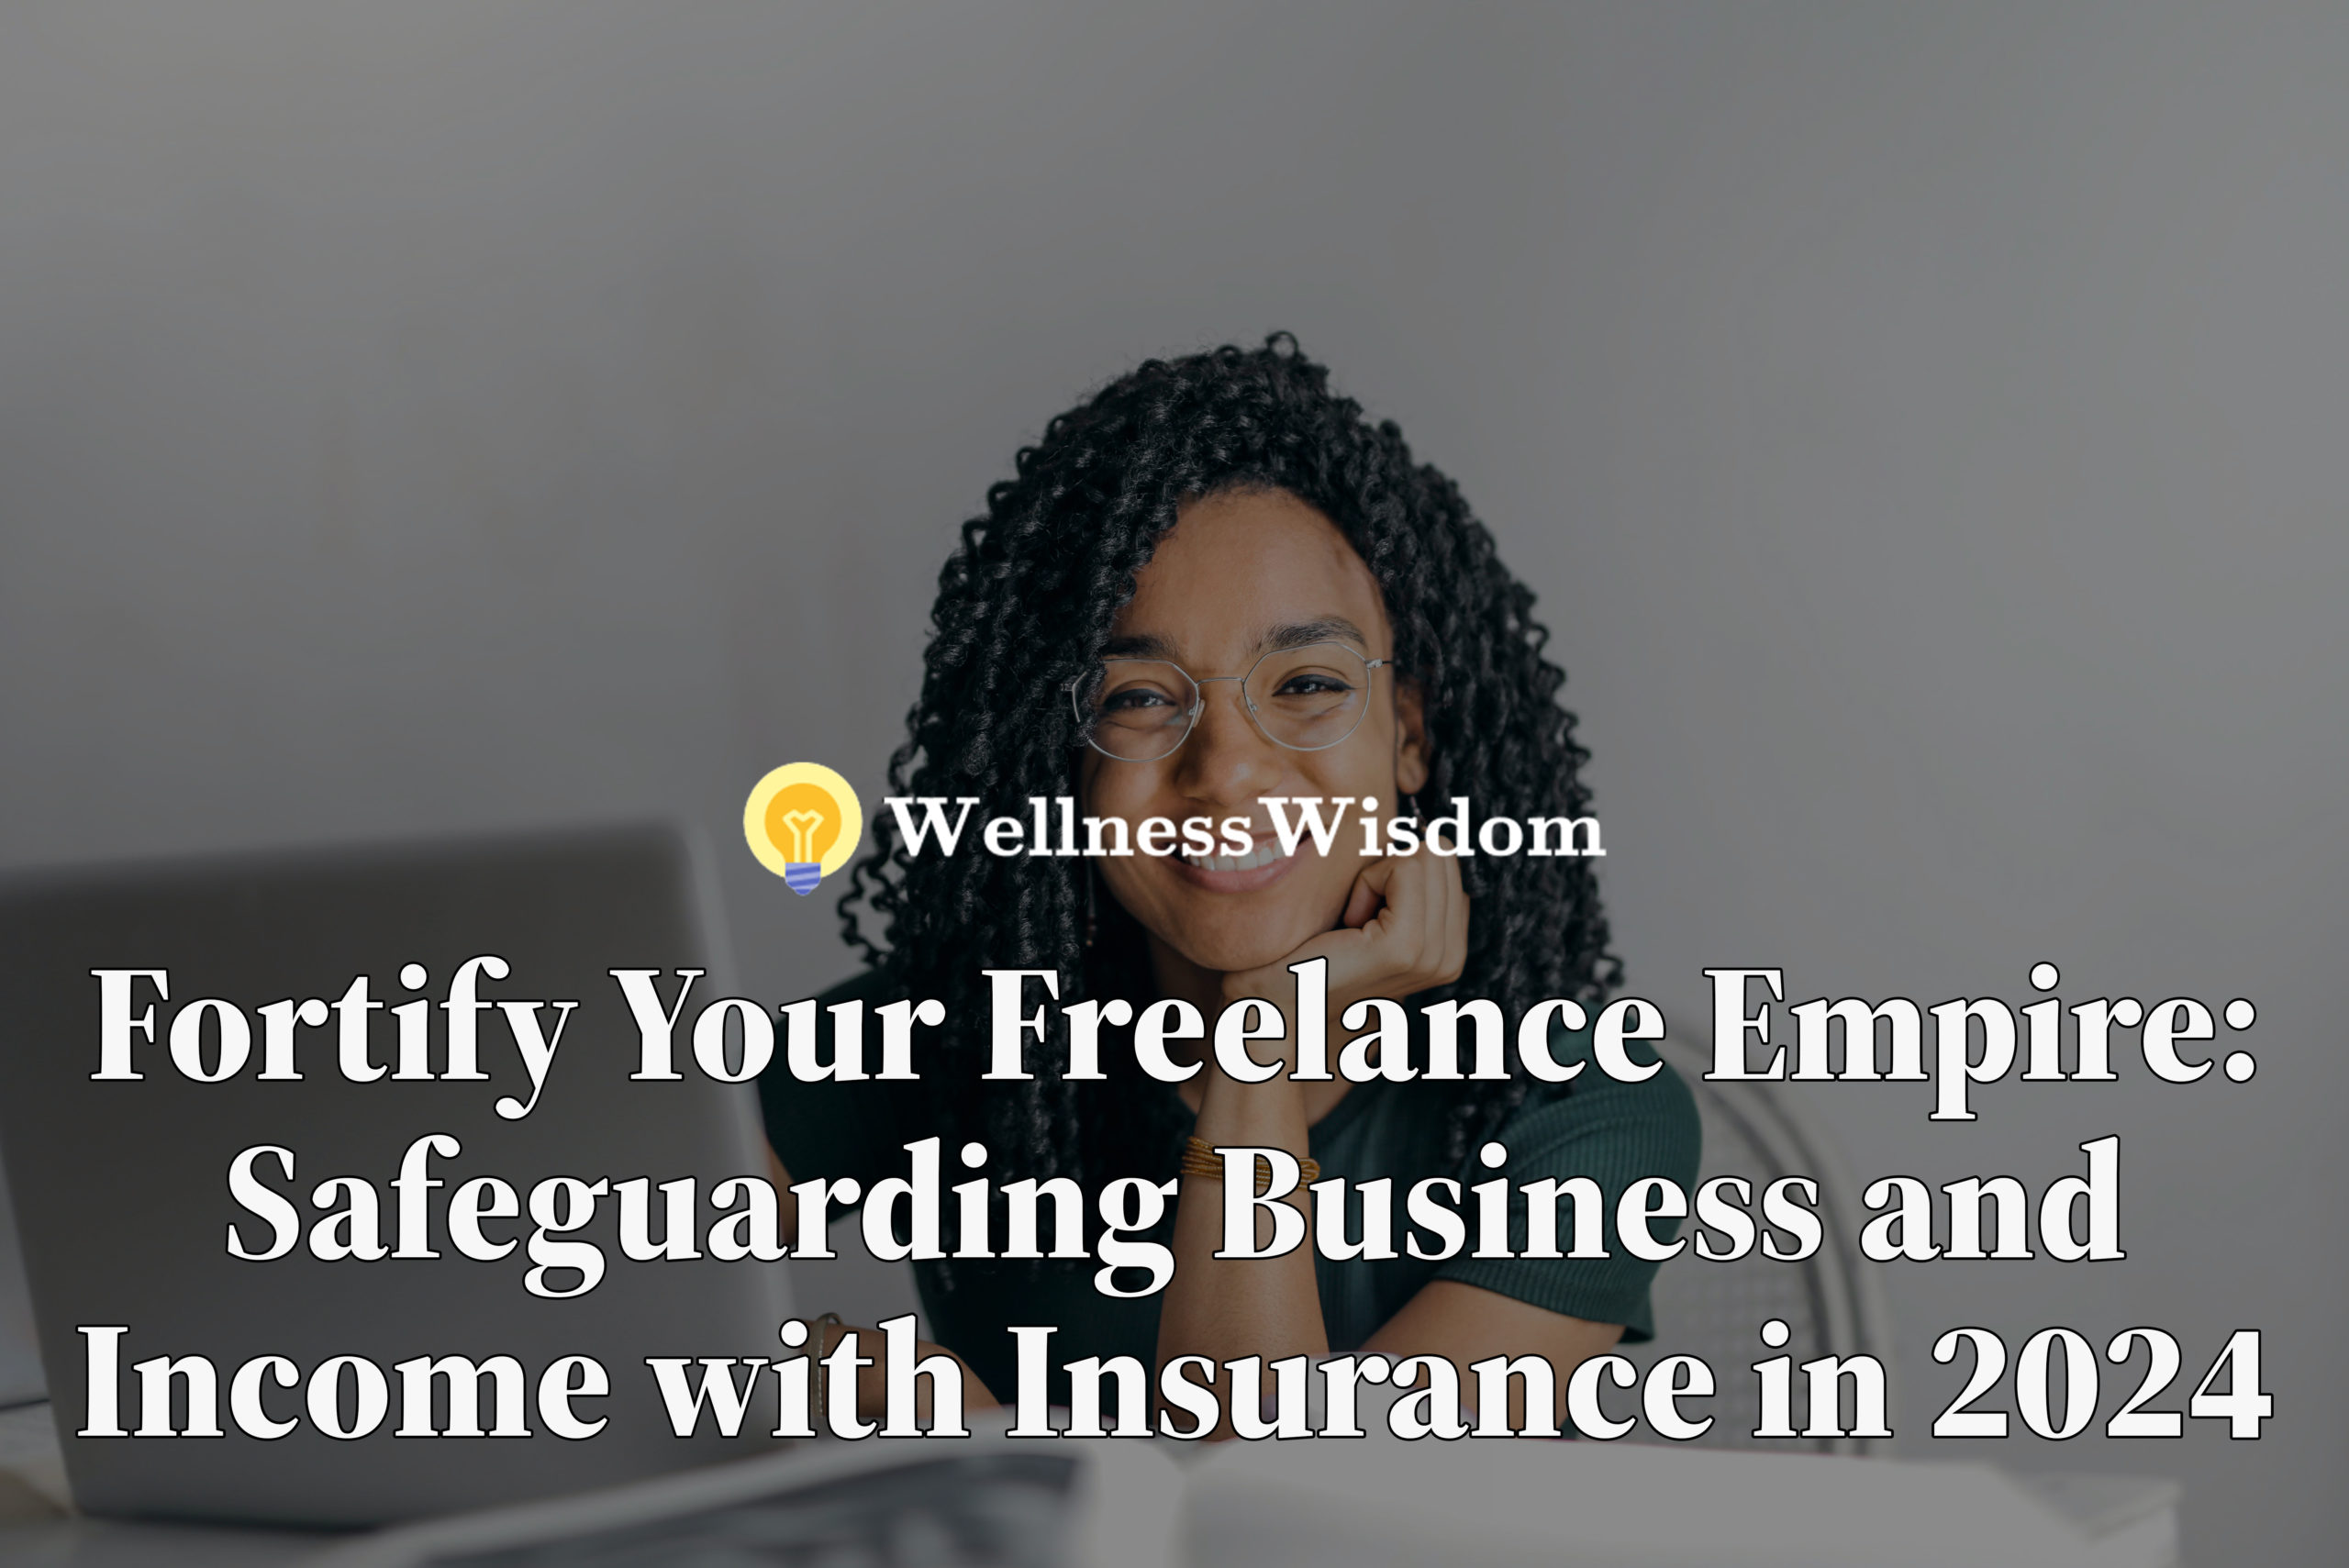 Insurance for freelancers, Freelance insurance, Liability insurance, Professional liability insurance, Business insurance, Income protection, Disability insurance, Health insurance, Life insurance, Asset protection